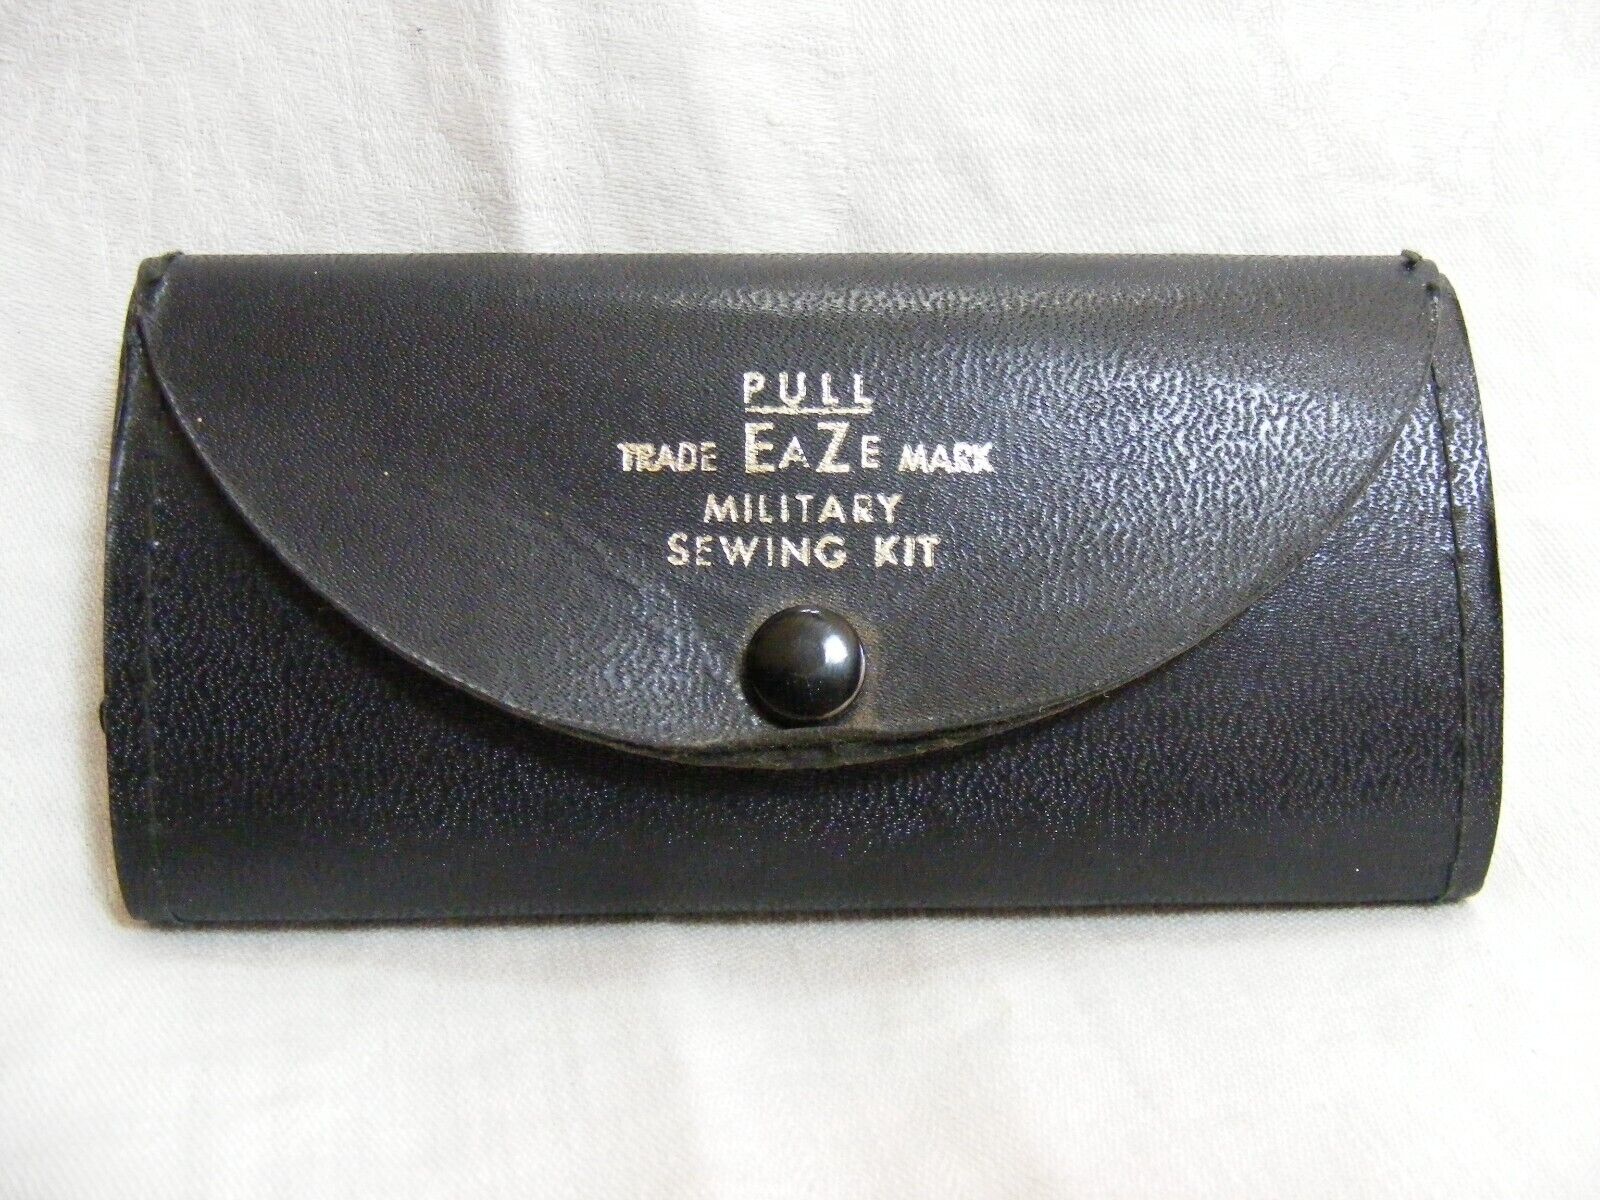 Vintage 1950's U.S. Air Force E-Z Trademark Sewing Kit Pouch 8-a #50